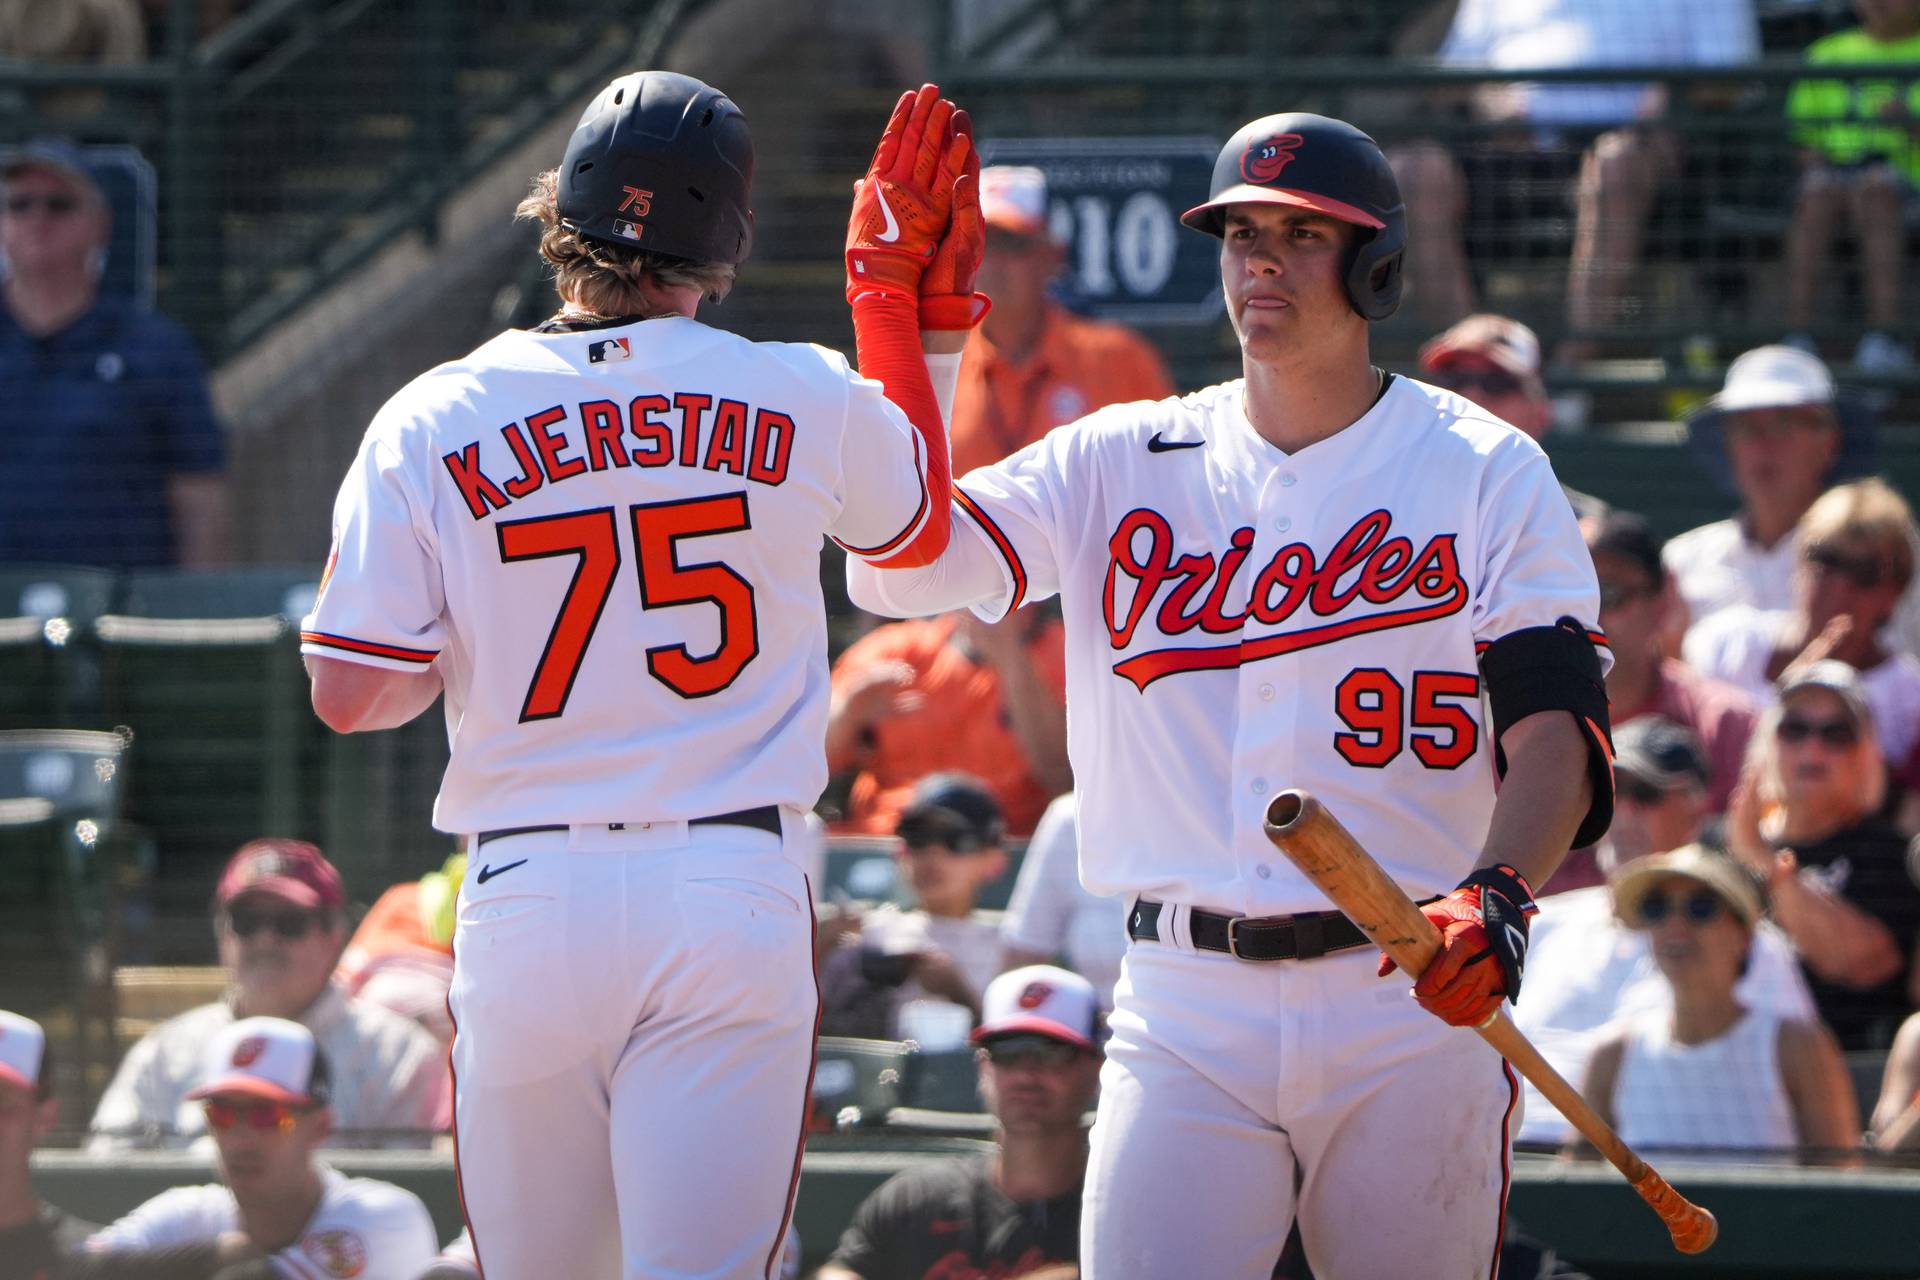 Heston Kjerstad (75) high fives Coby Mayo (95) at Ed Smith Stadium after scoring a run during the fourth inning of a game against the Minnesota Twins on 2/25/23. The Baltimore Orioles hosted the Twins for their home opener as the Florida Grapefruit League started on Saturday.